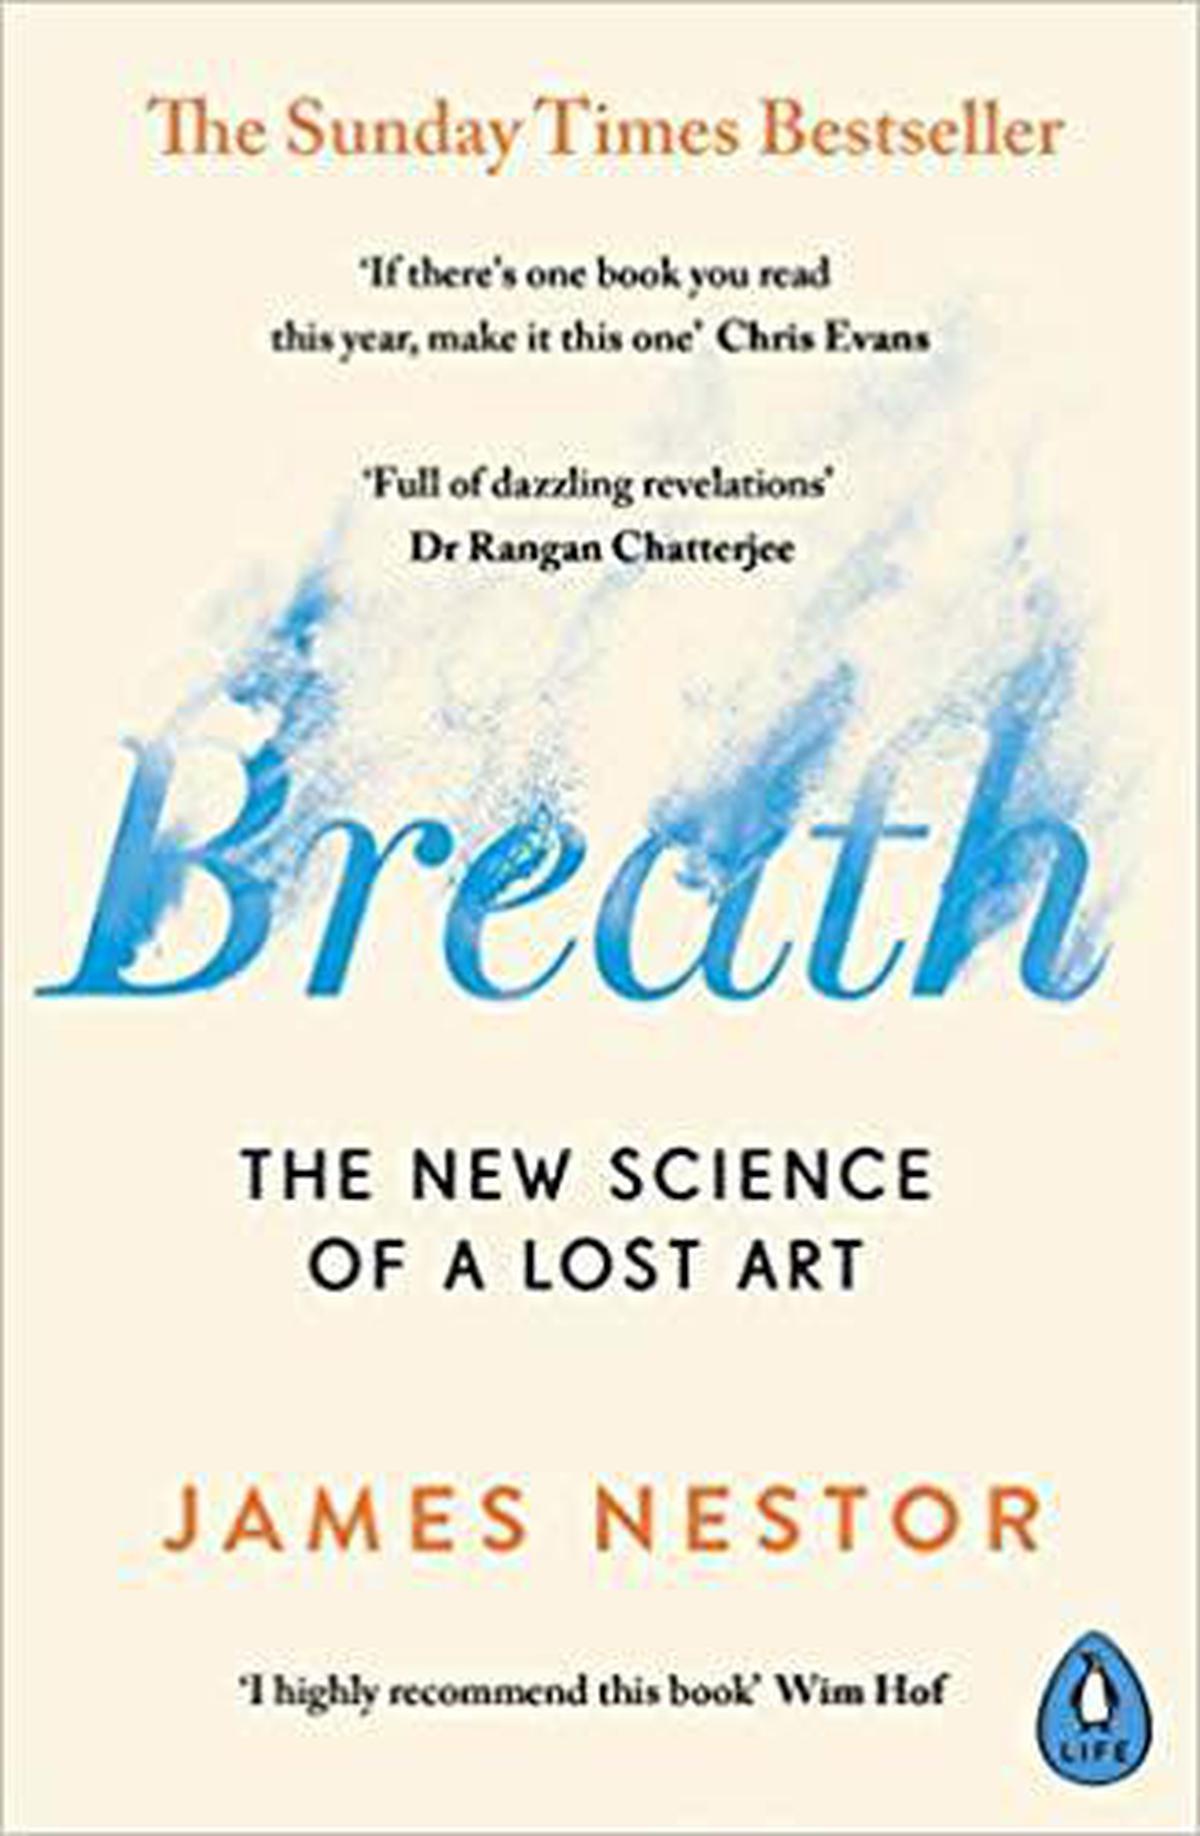 Health books that help us breathe, eat, live right